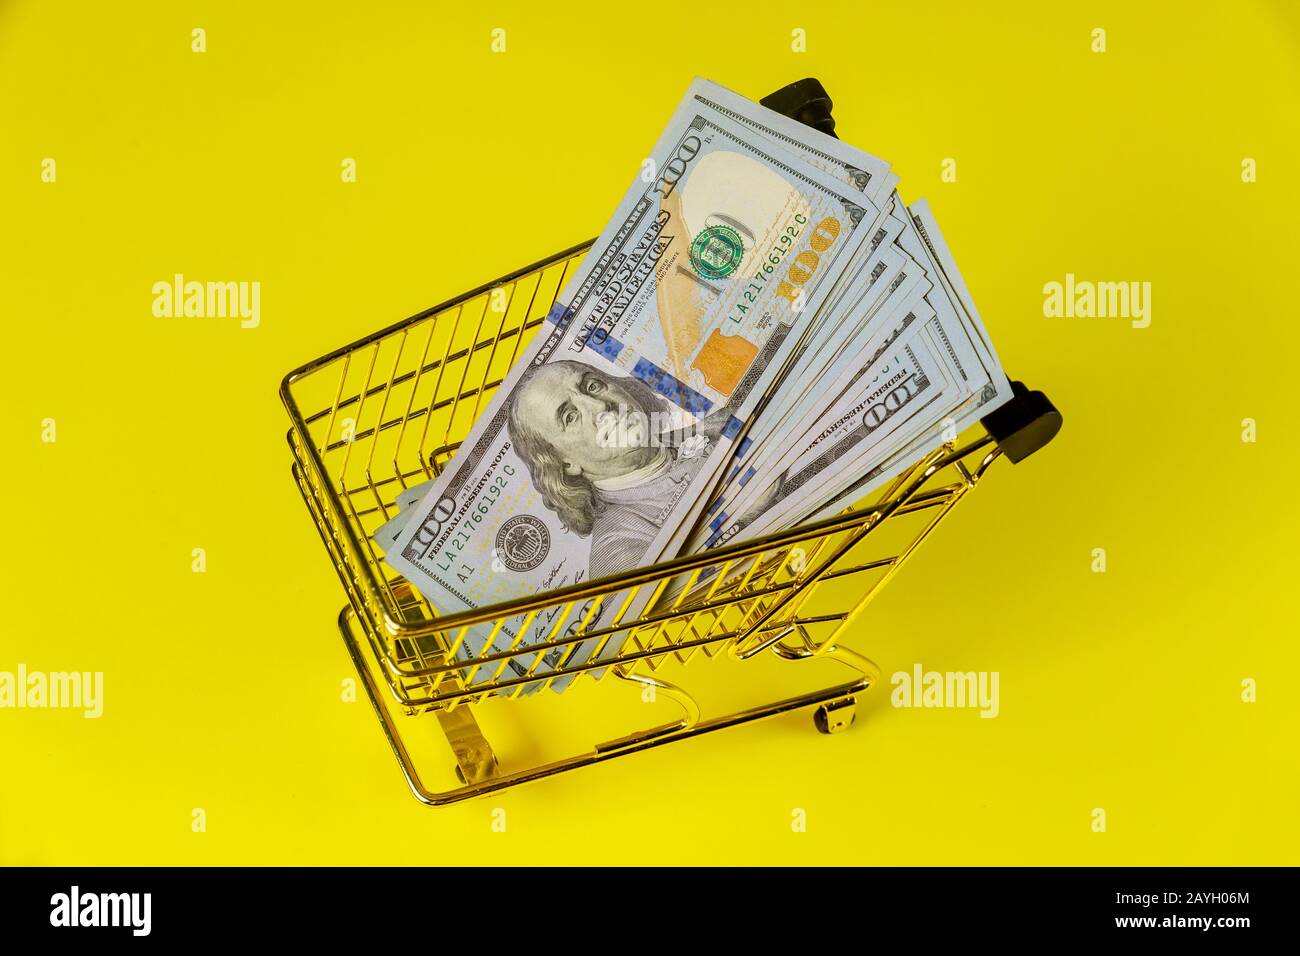 Grocery cart with currency US dollar cash on table banknotes close-up Stock Photo